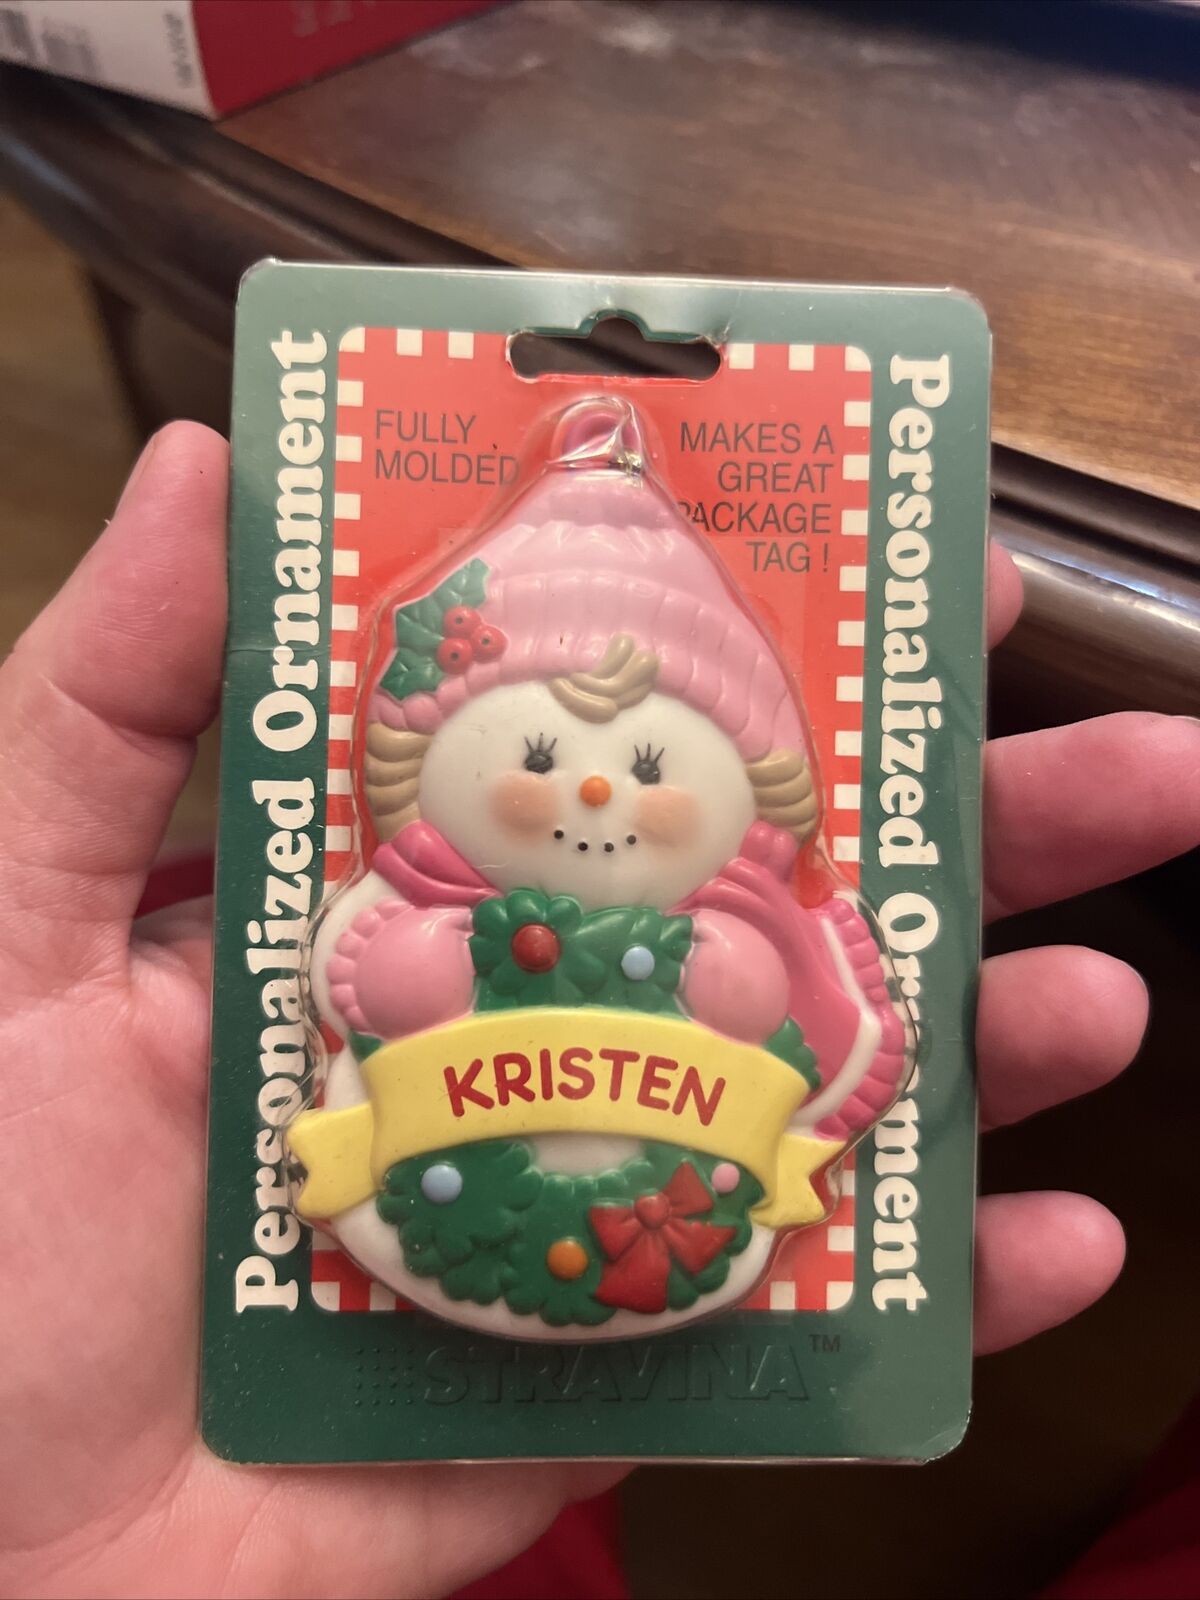 Stravina Snowgirl Personalized Ornament KRISTEN Pink Fully Molden Package Tag